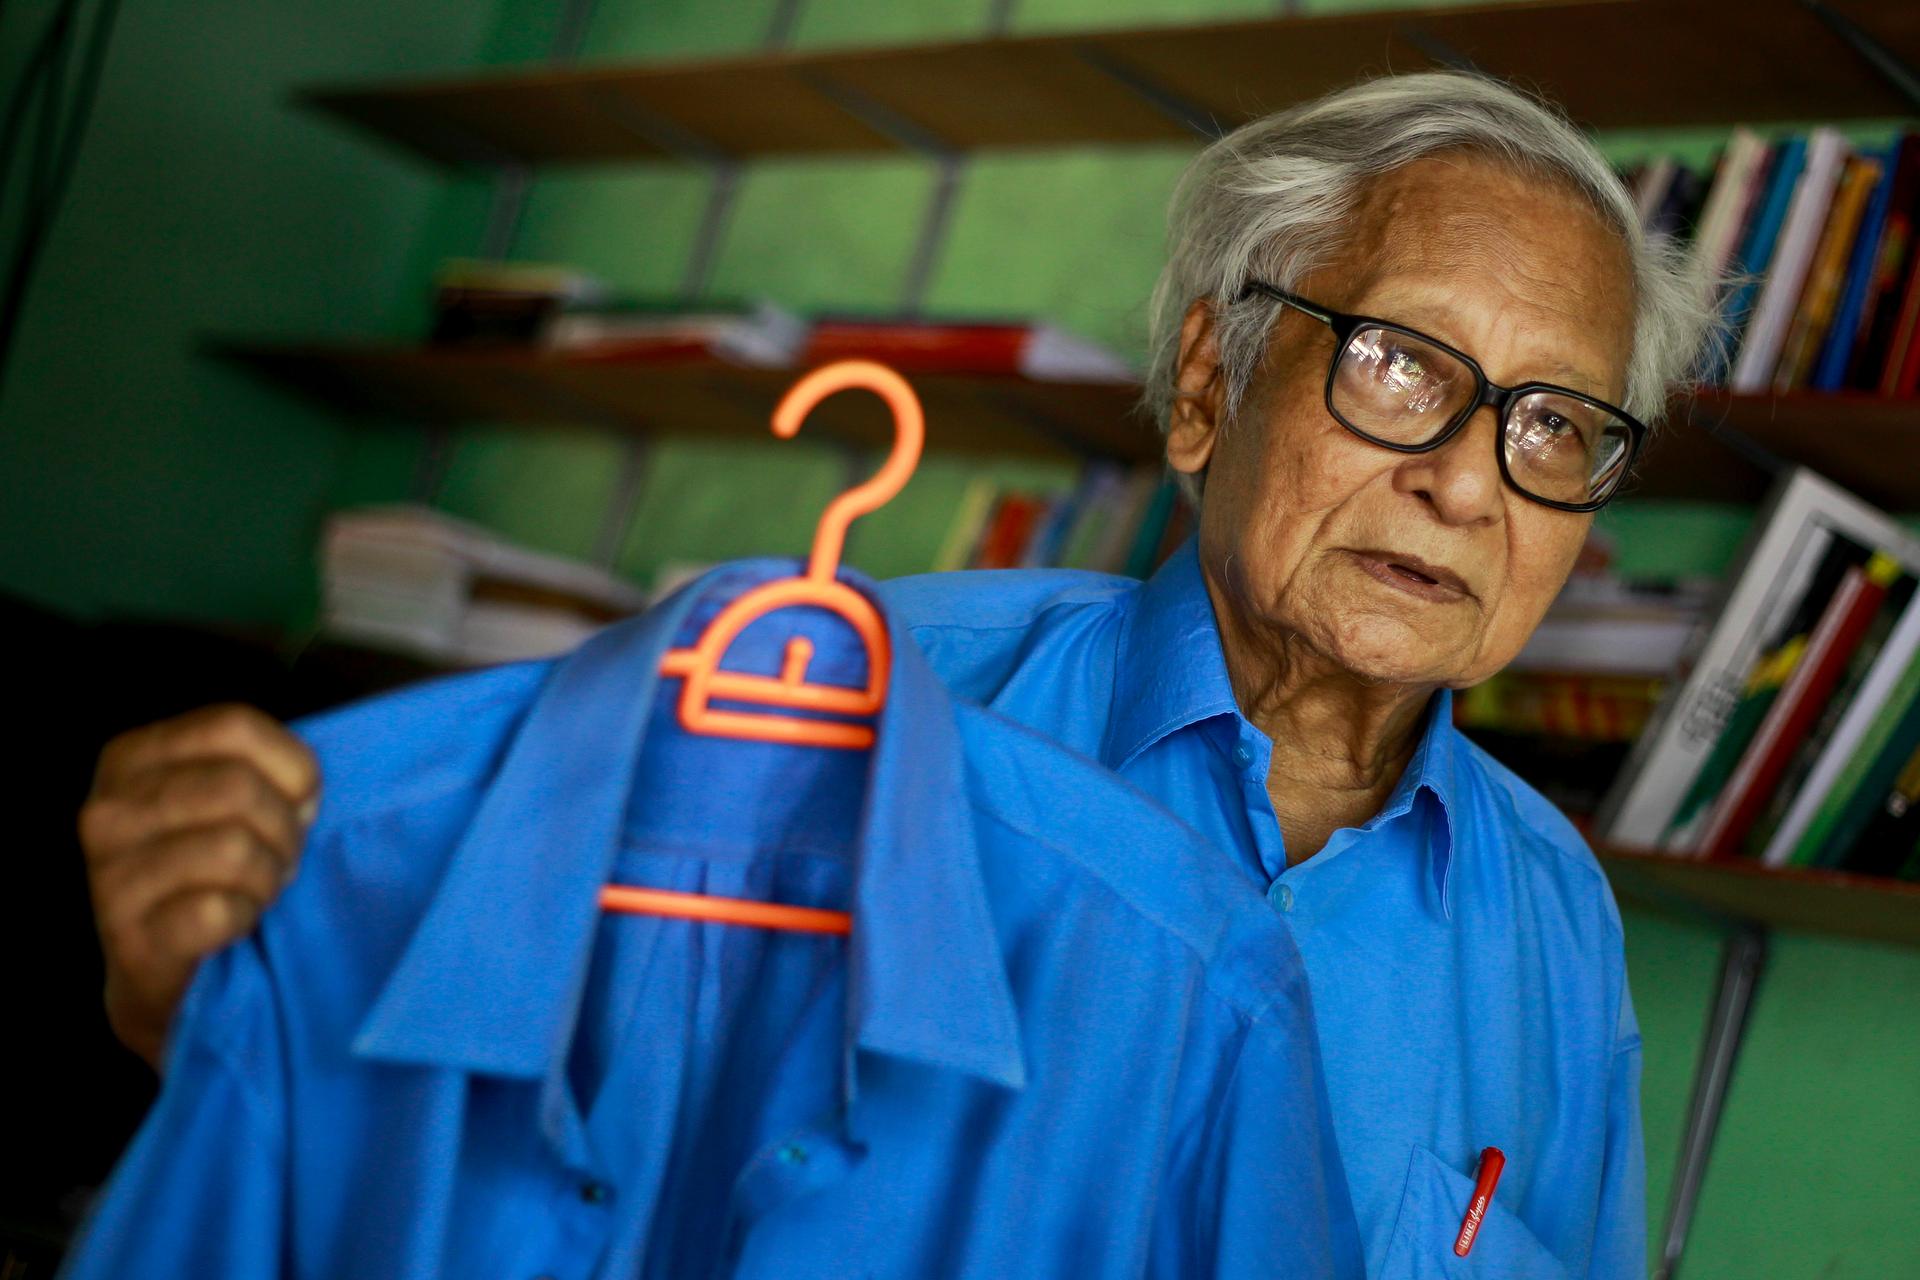 Win Tin with his prison-issued work shirts in 2013